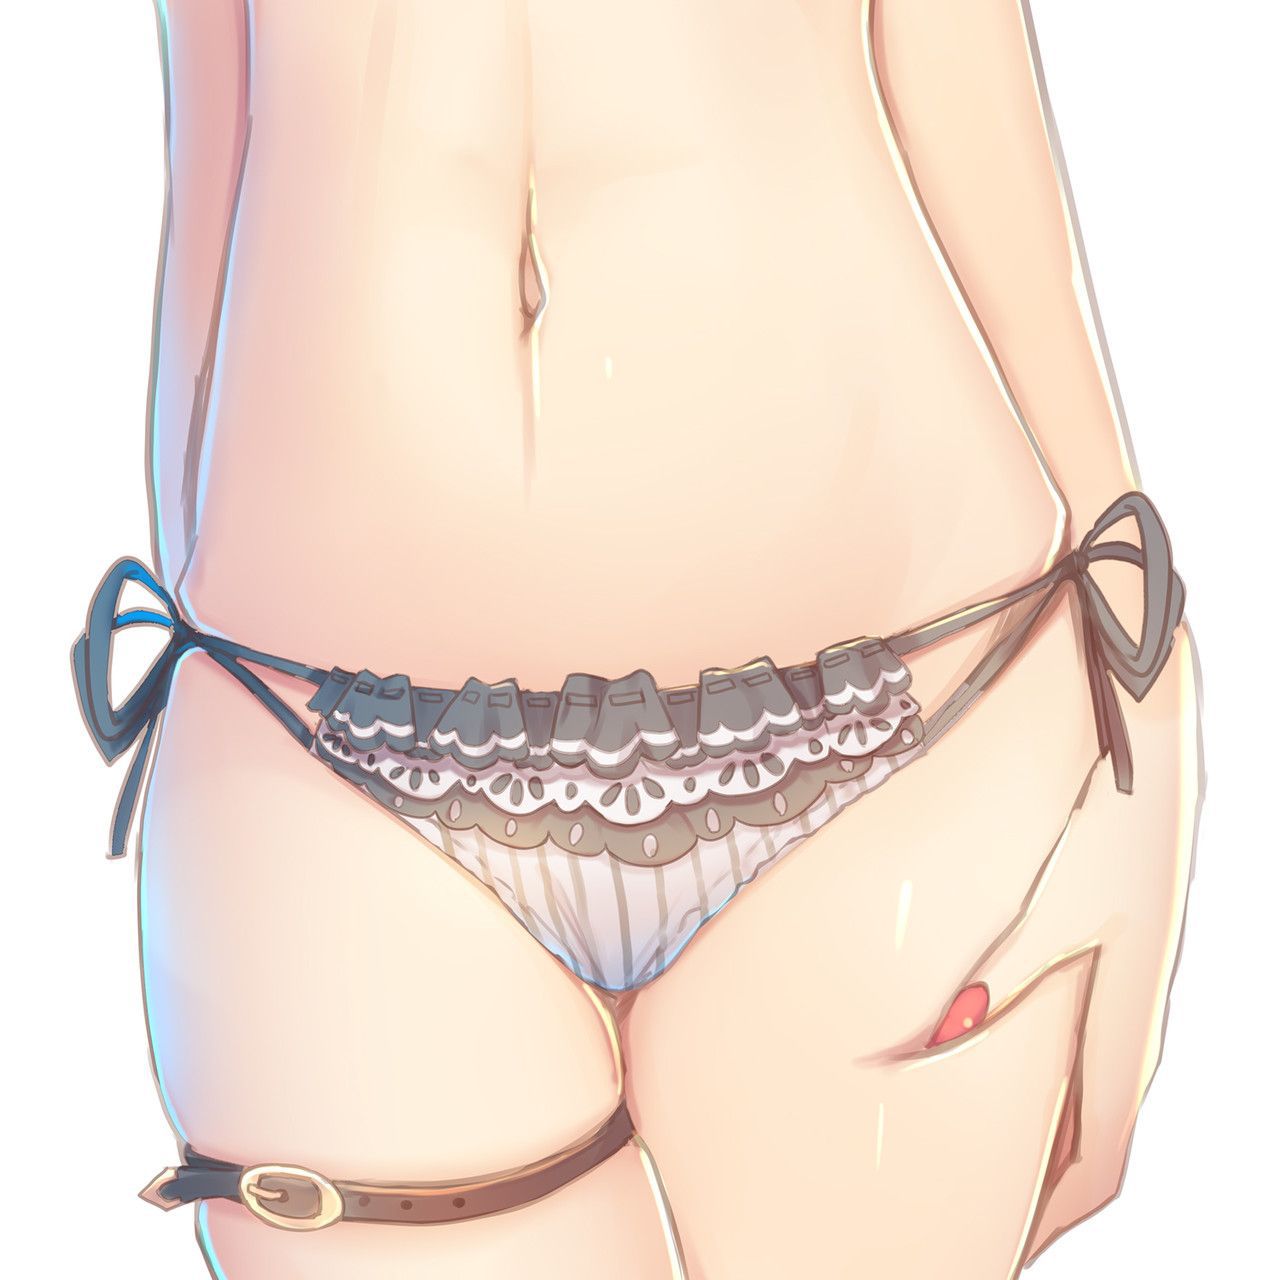 [Secondary/ZIP] second-order image summary of the girl's close-up pants because it is the day of pants 15